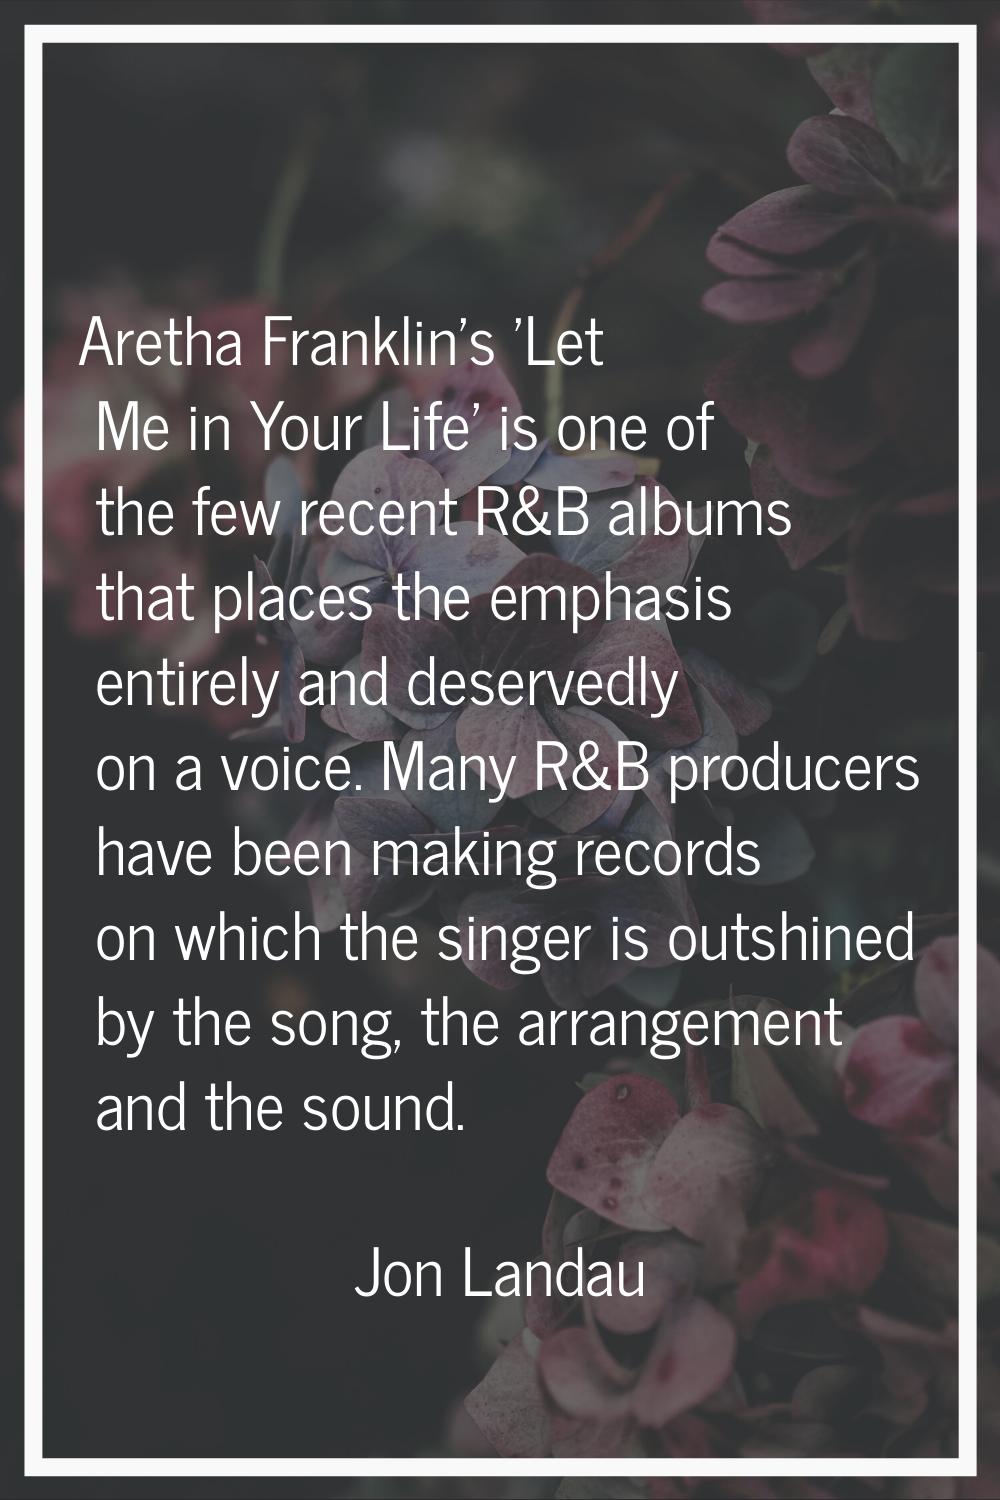 Aretha Franklin's 'Let Me in Your Life' is one of the few recent R&B albums that places the emphasi